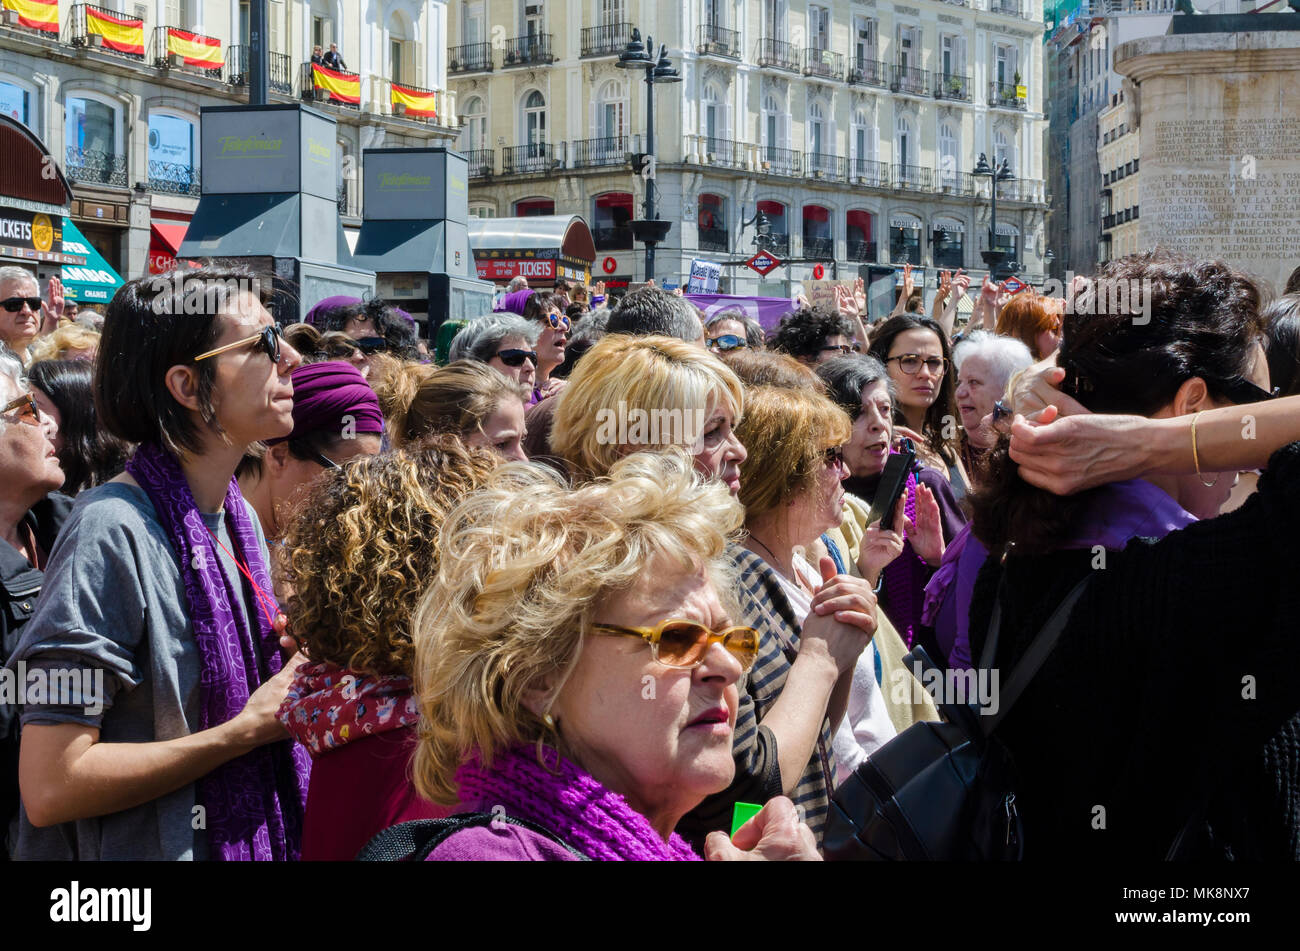 A view in the women rights mass meeting, Puerta del Sol, Madrid city, Spain Stock Photo